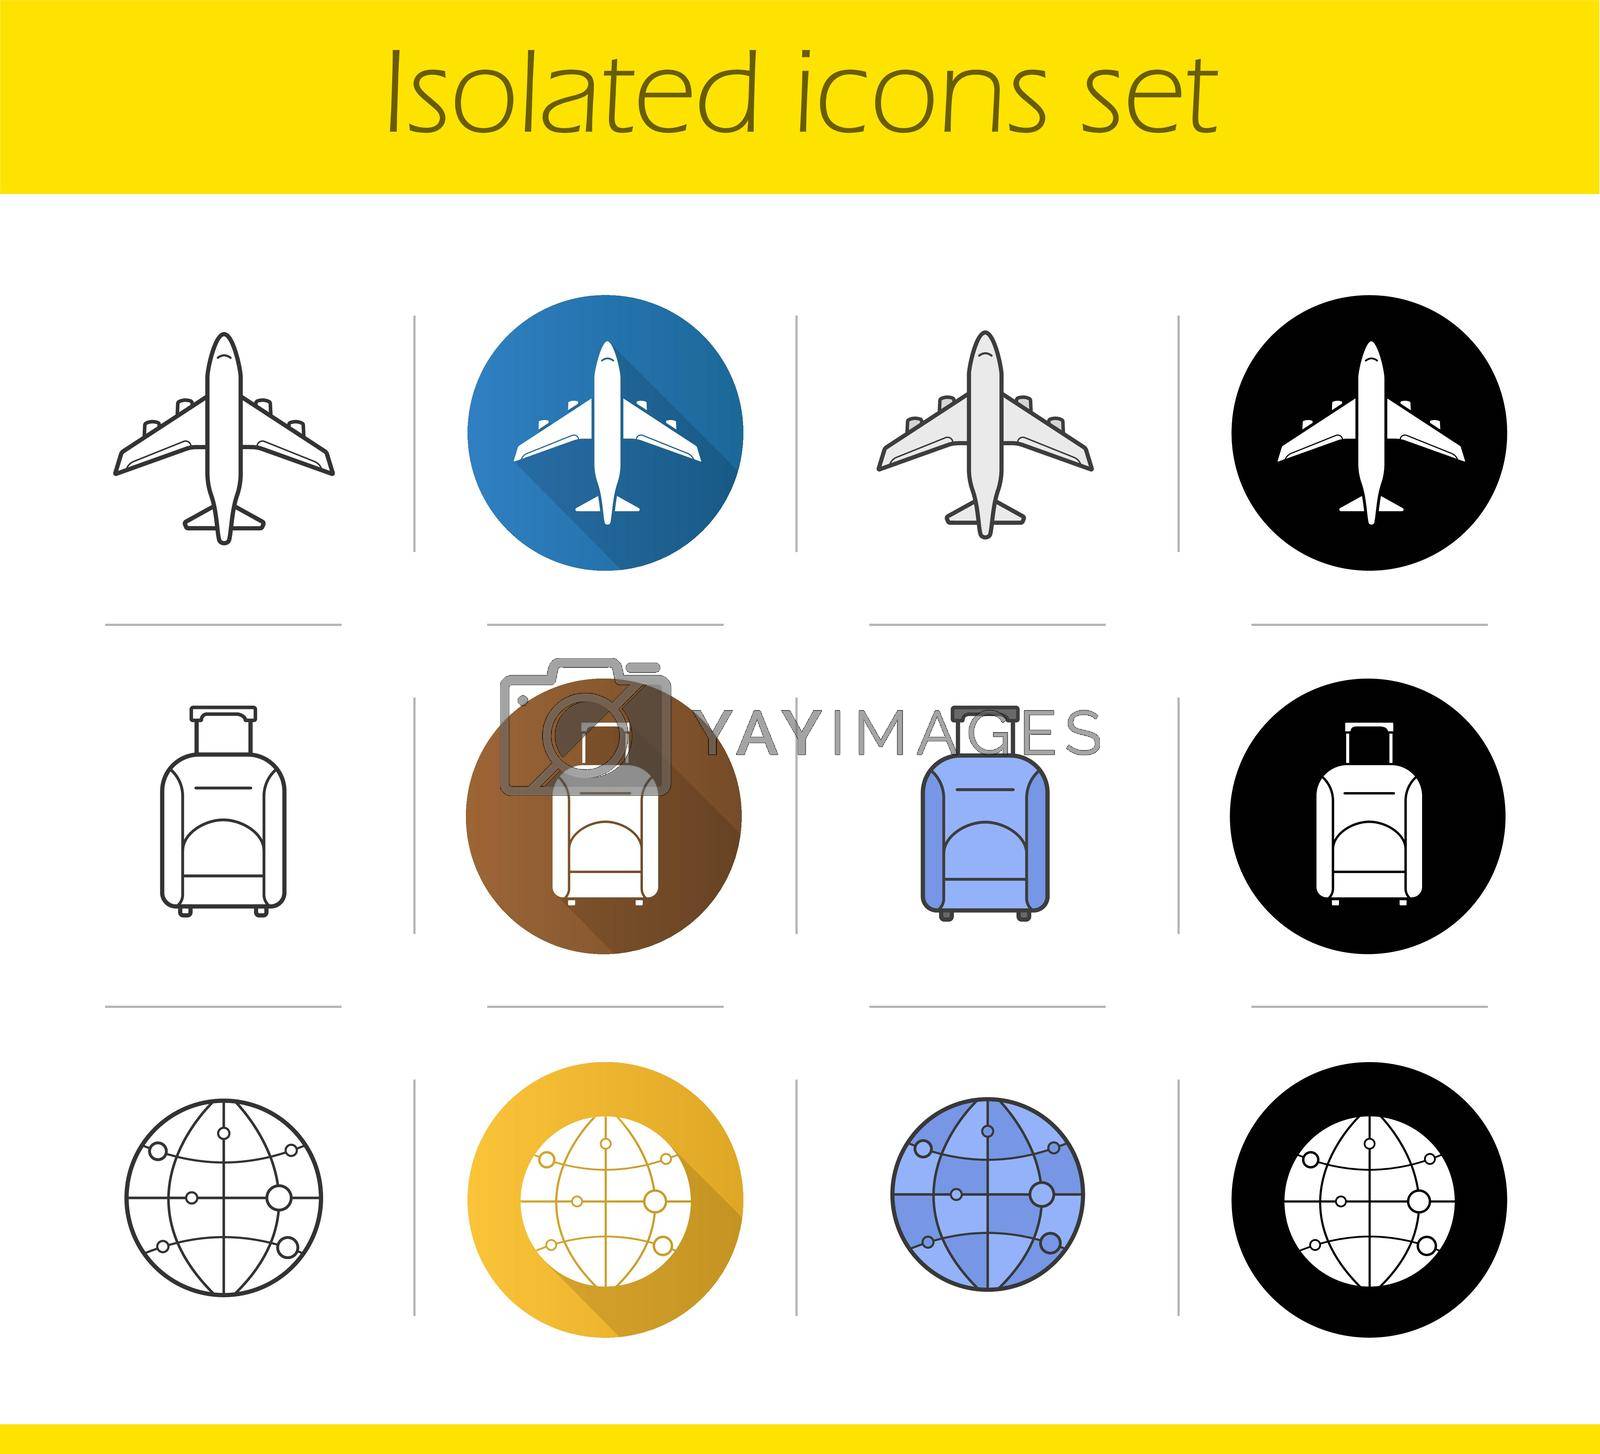 Air travel icons set. Flat design, linear, black and color styles. Travelling by plane, luggage bag on wheels, worldwide globe symbol. Isolated vector illustrations